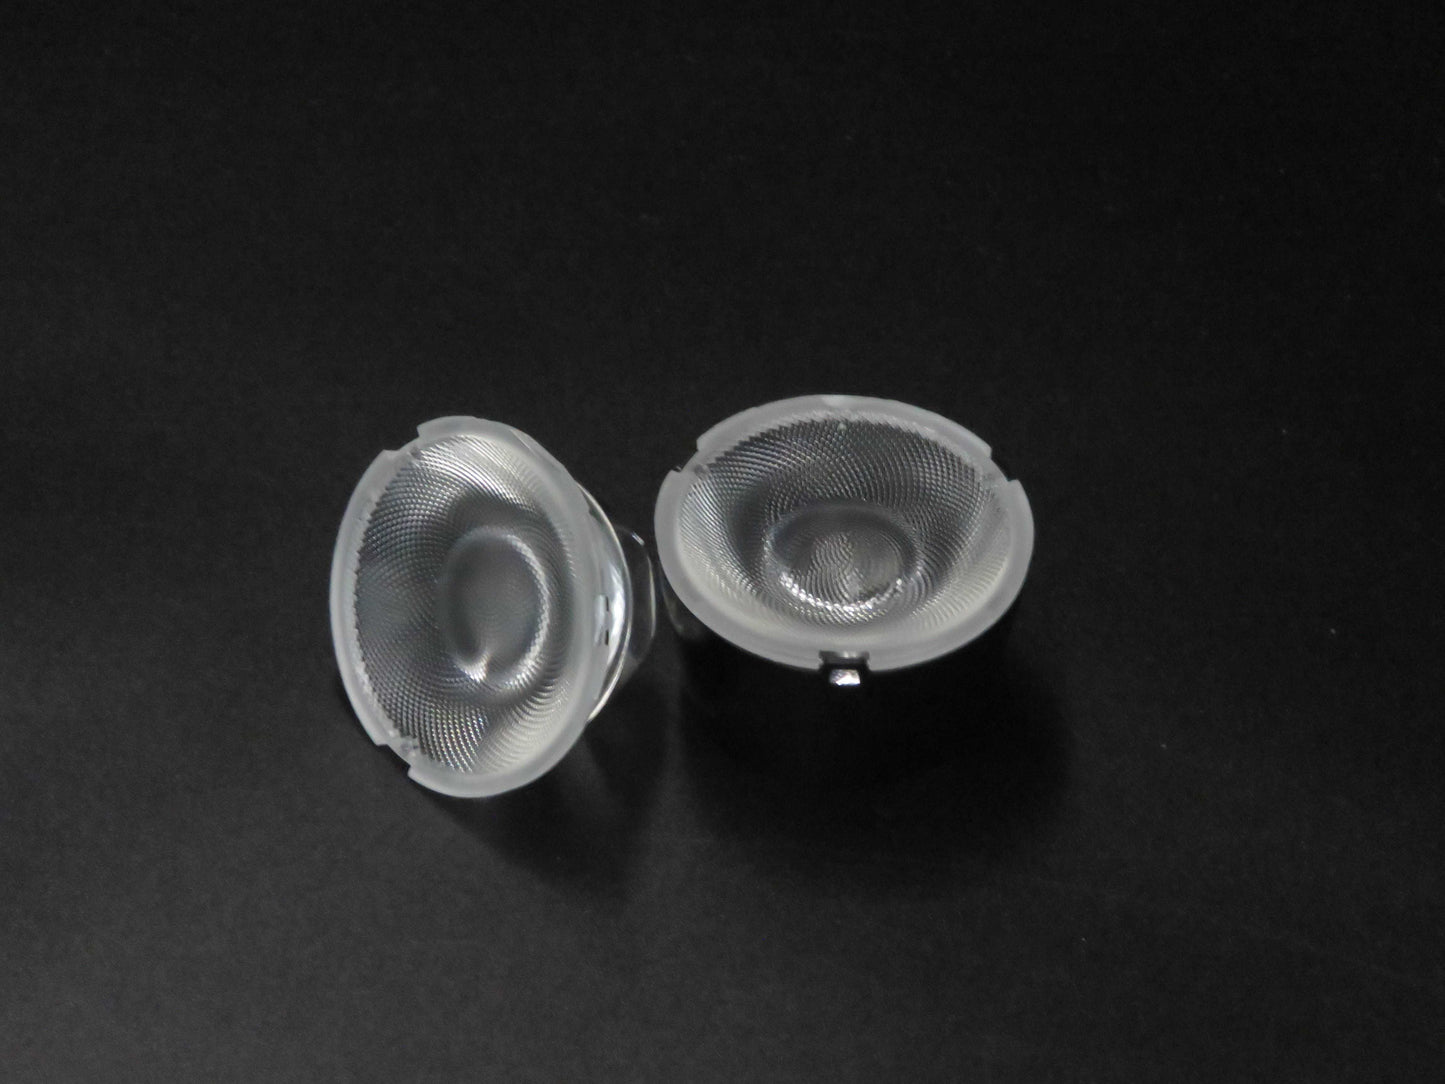 45MM Wall Washer Lens 15/24/36 Degrees High Power Wall Washer Lighting High Quality Accessories